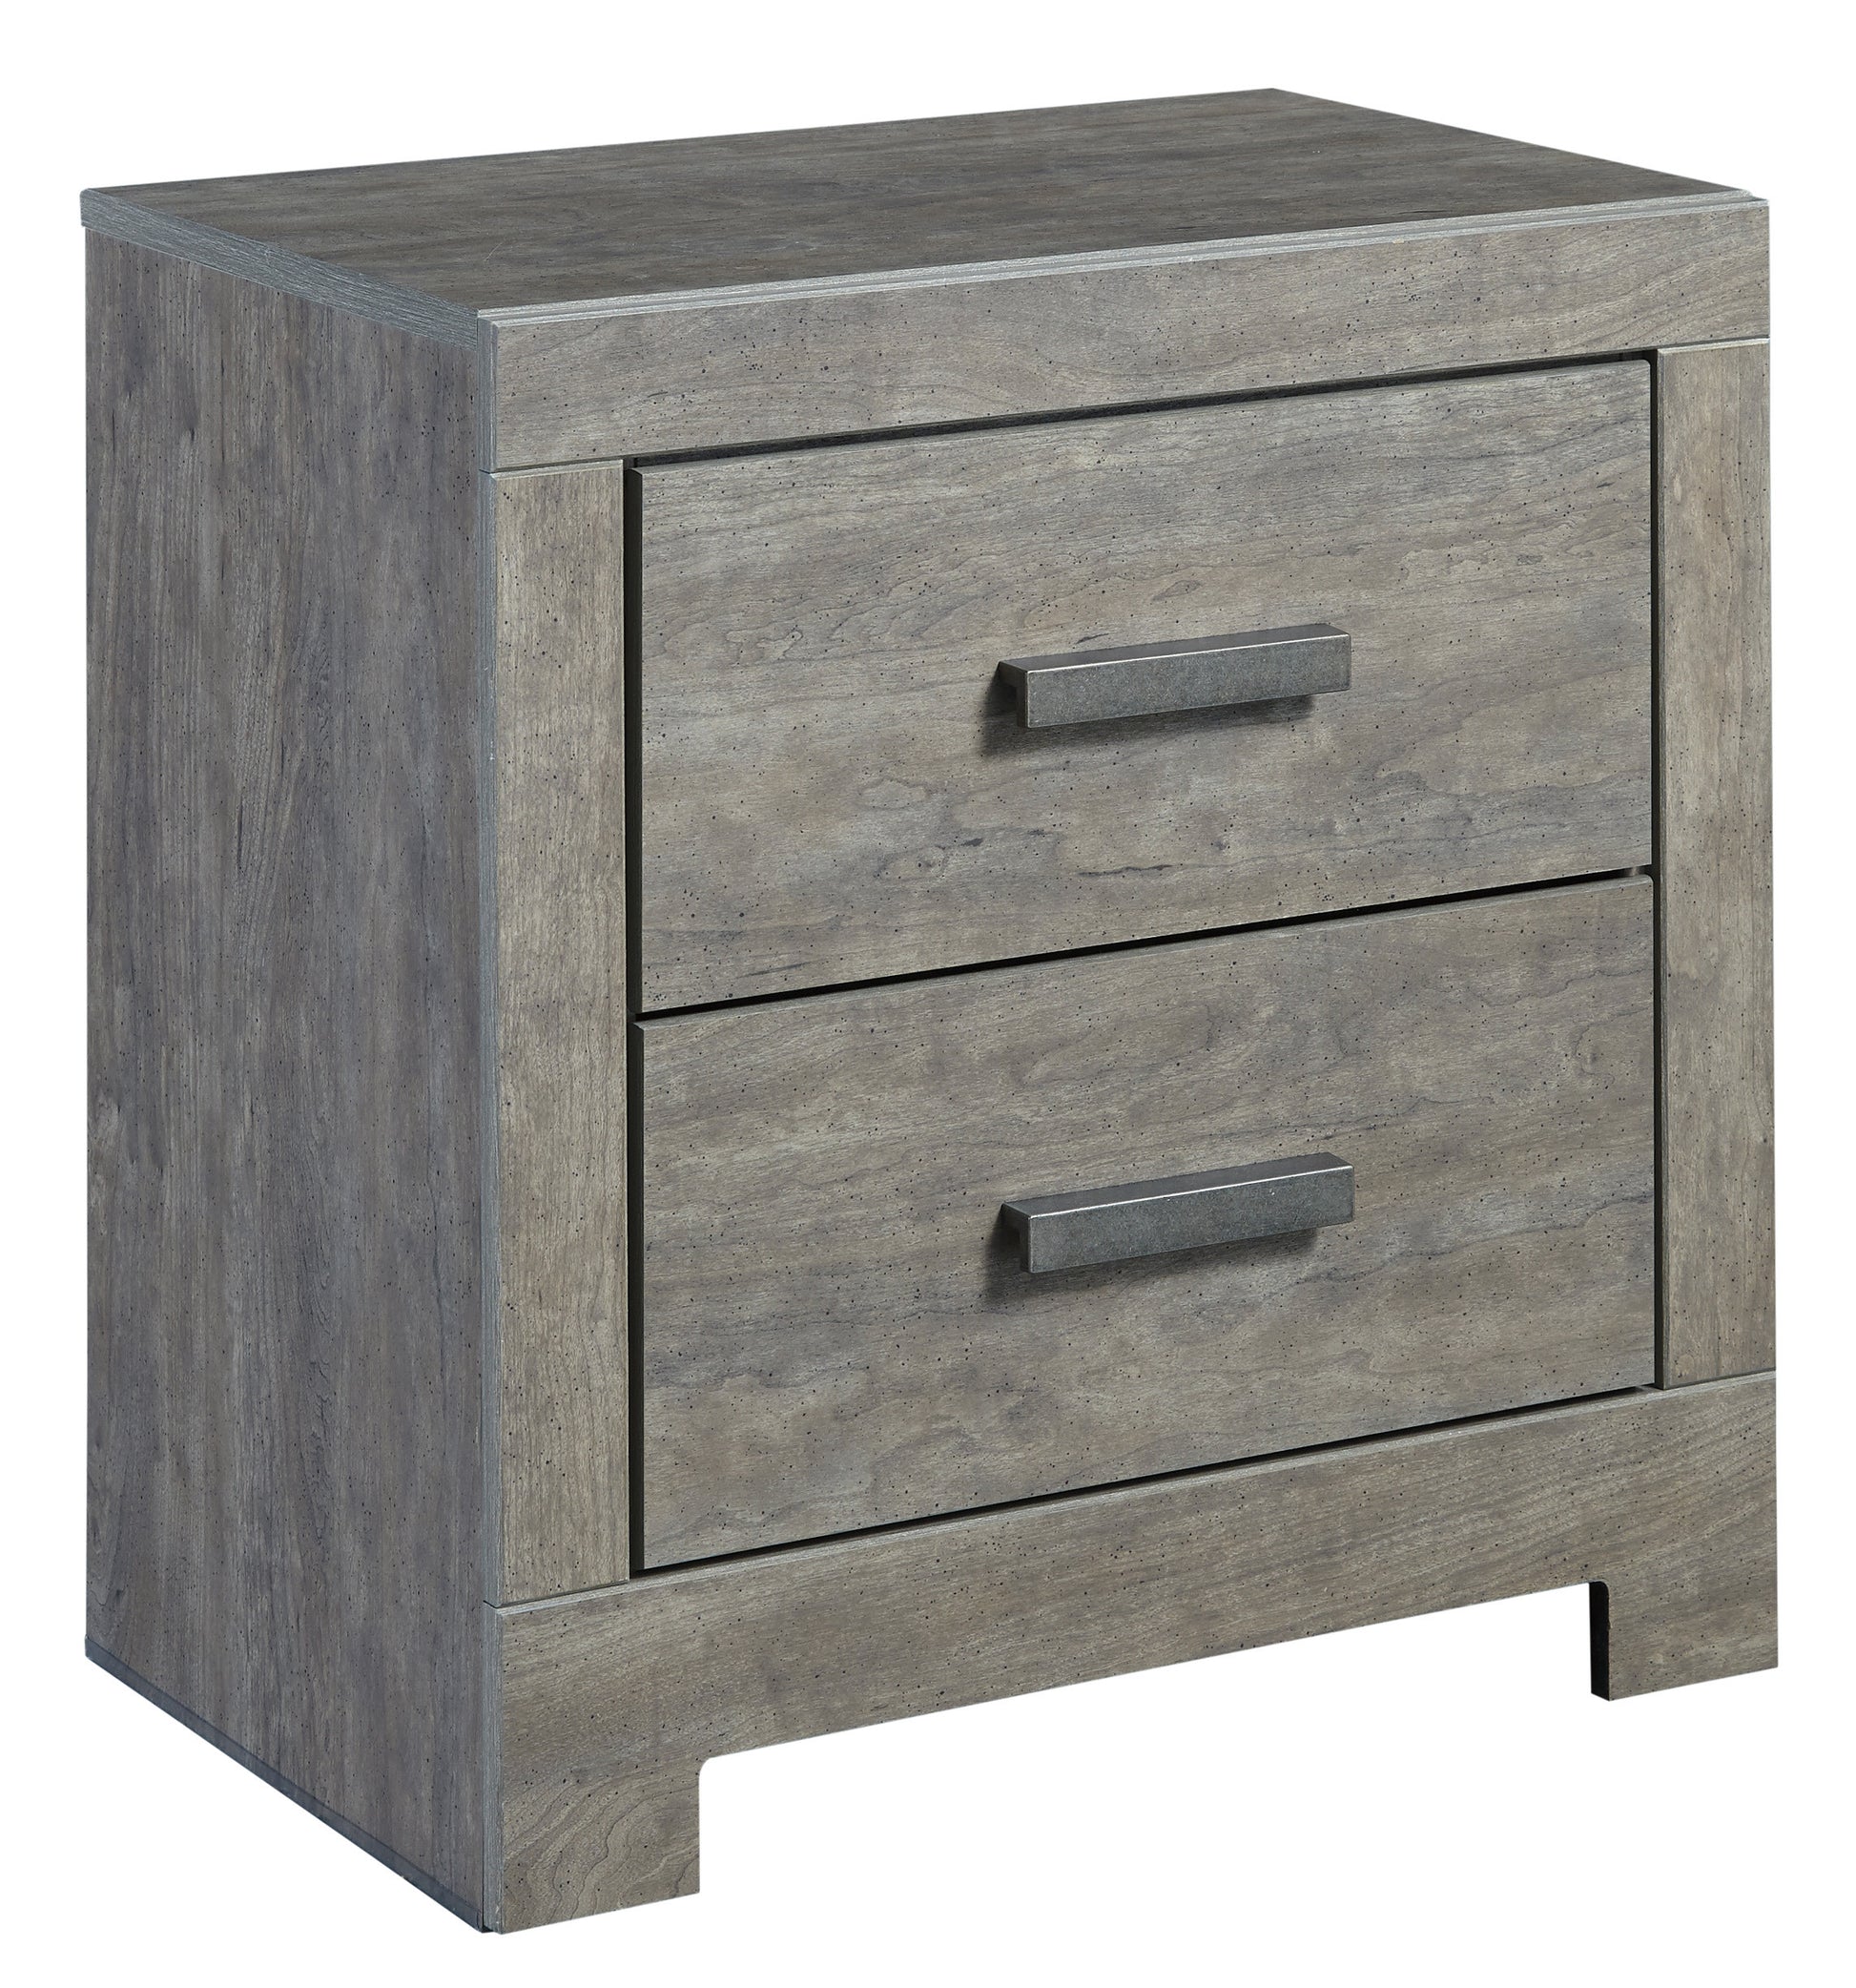 Ashley Culverbach 5PC Queen Panel Bedroom Set with Chest in Gray - The Furniture Space.